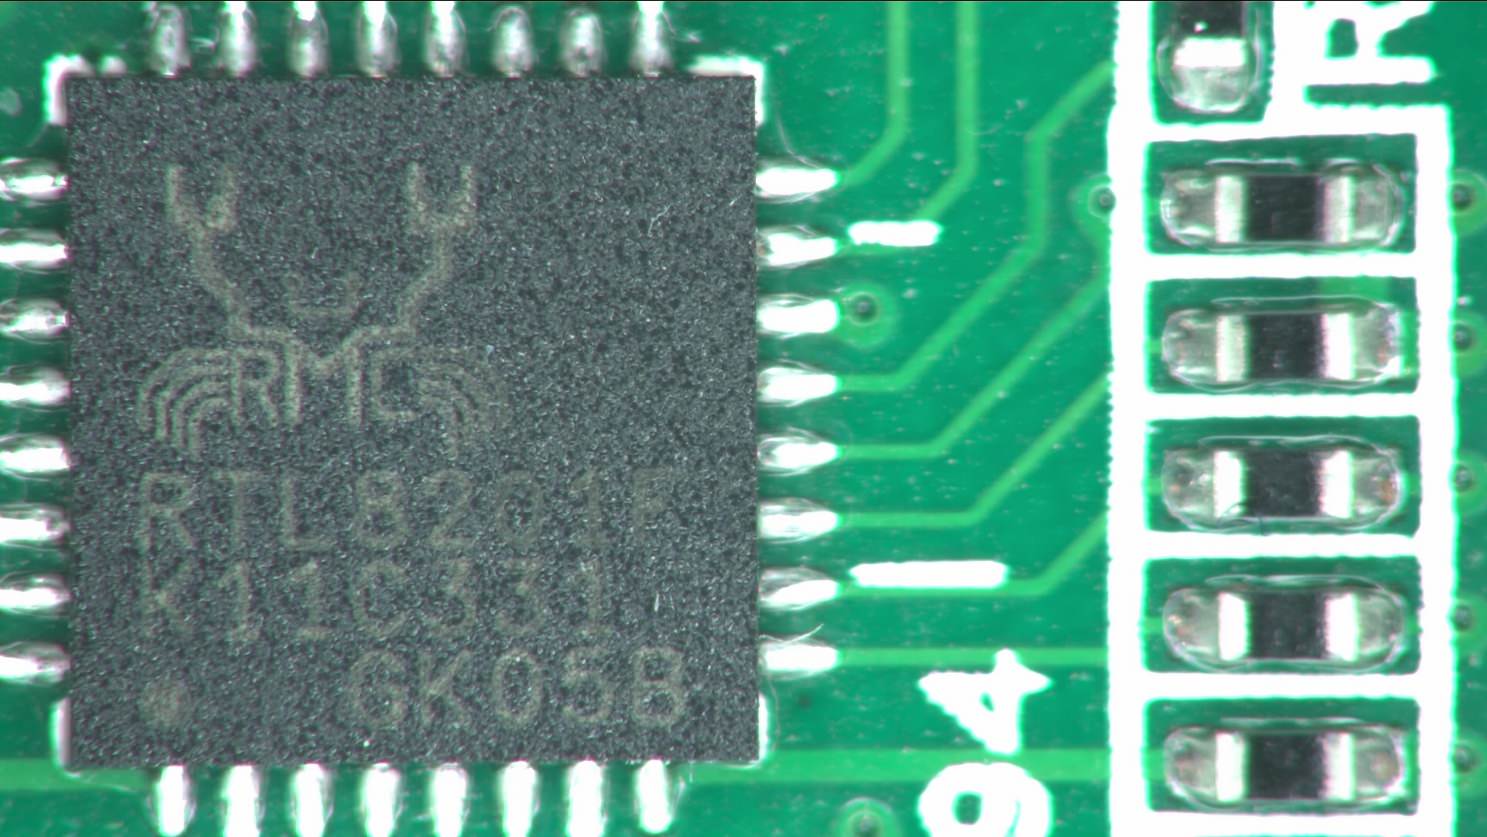 PCB captured with AFDM101 at 20X